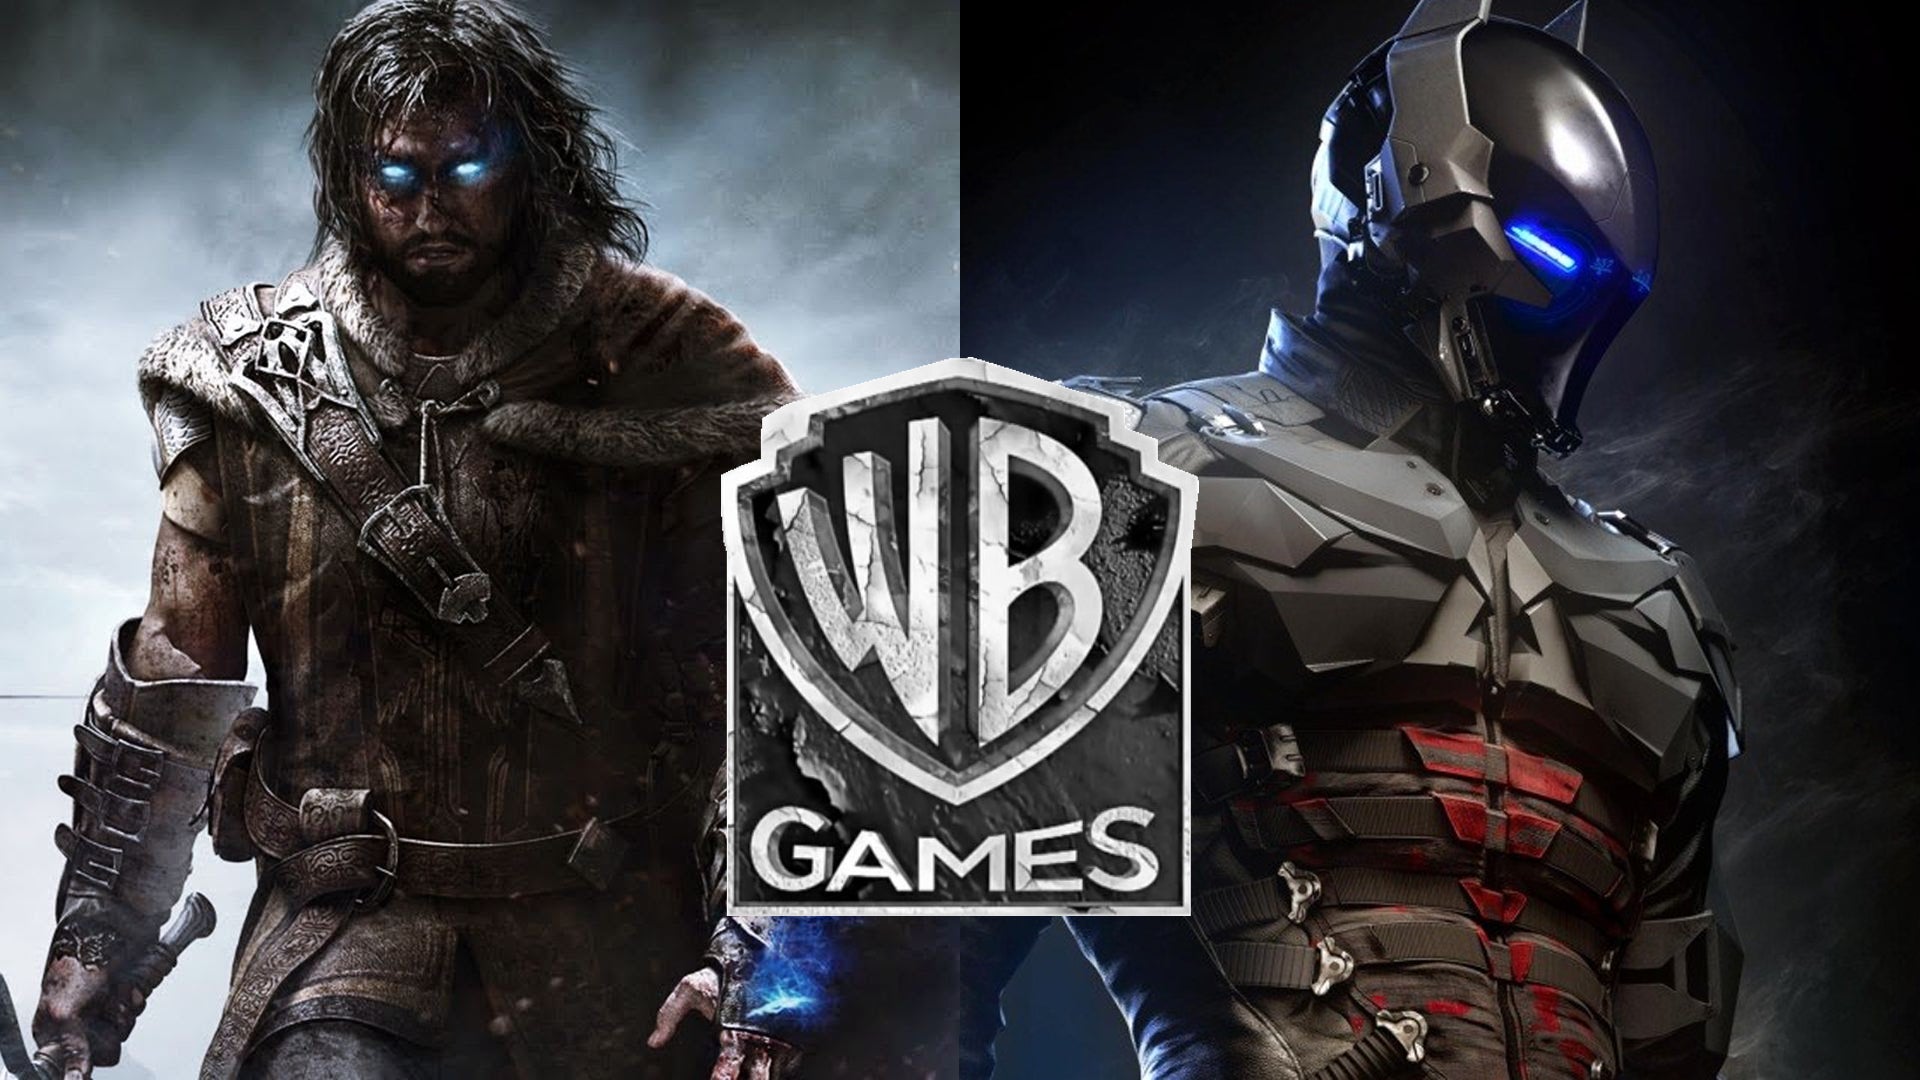 Image for Warner Bros. might be keeping its games division